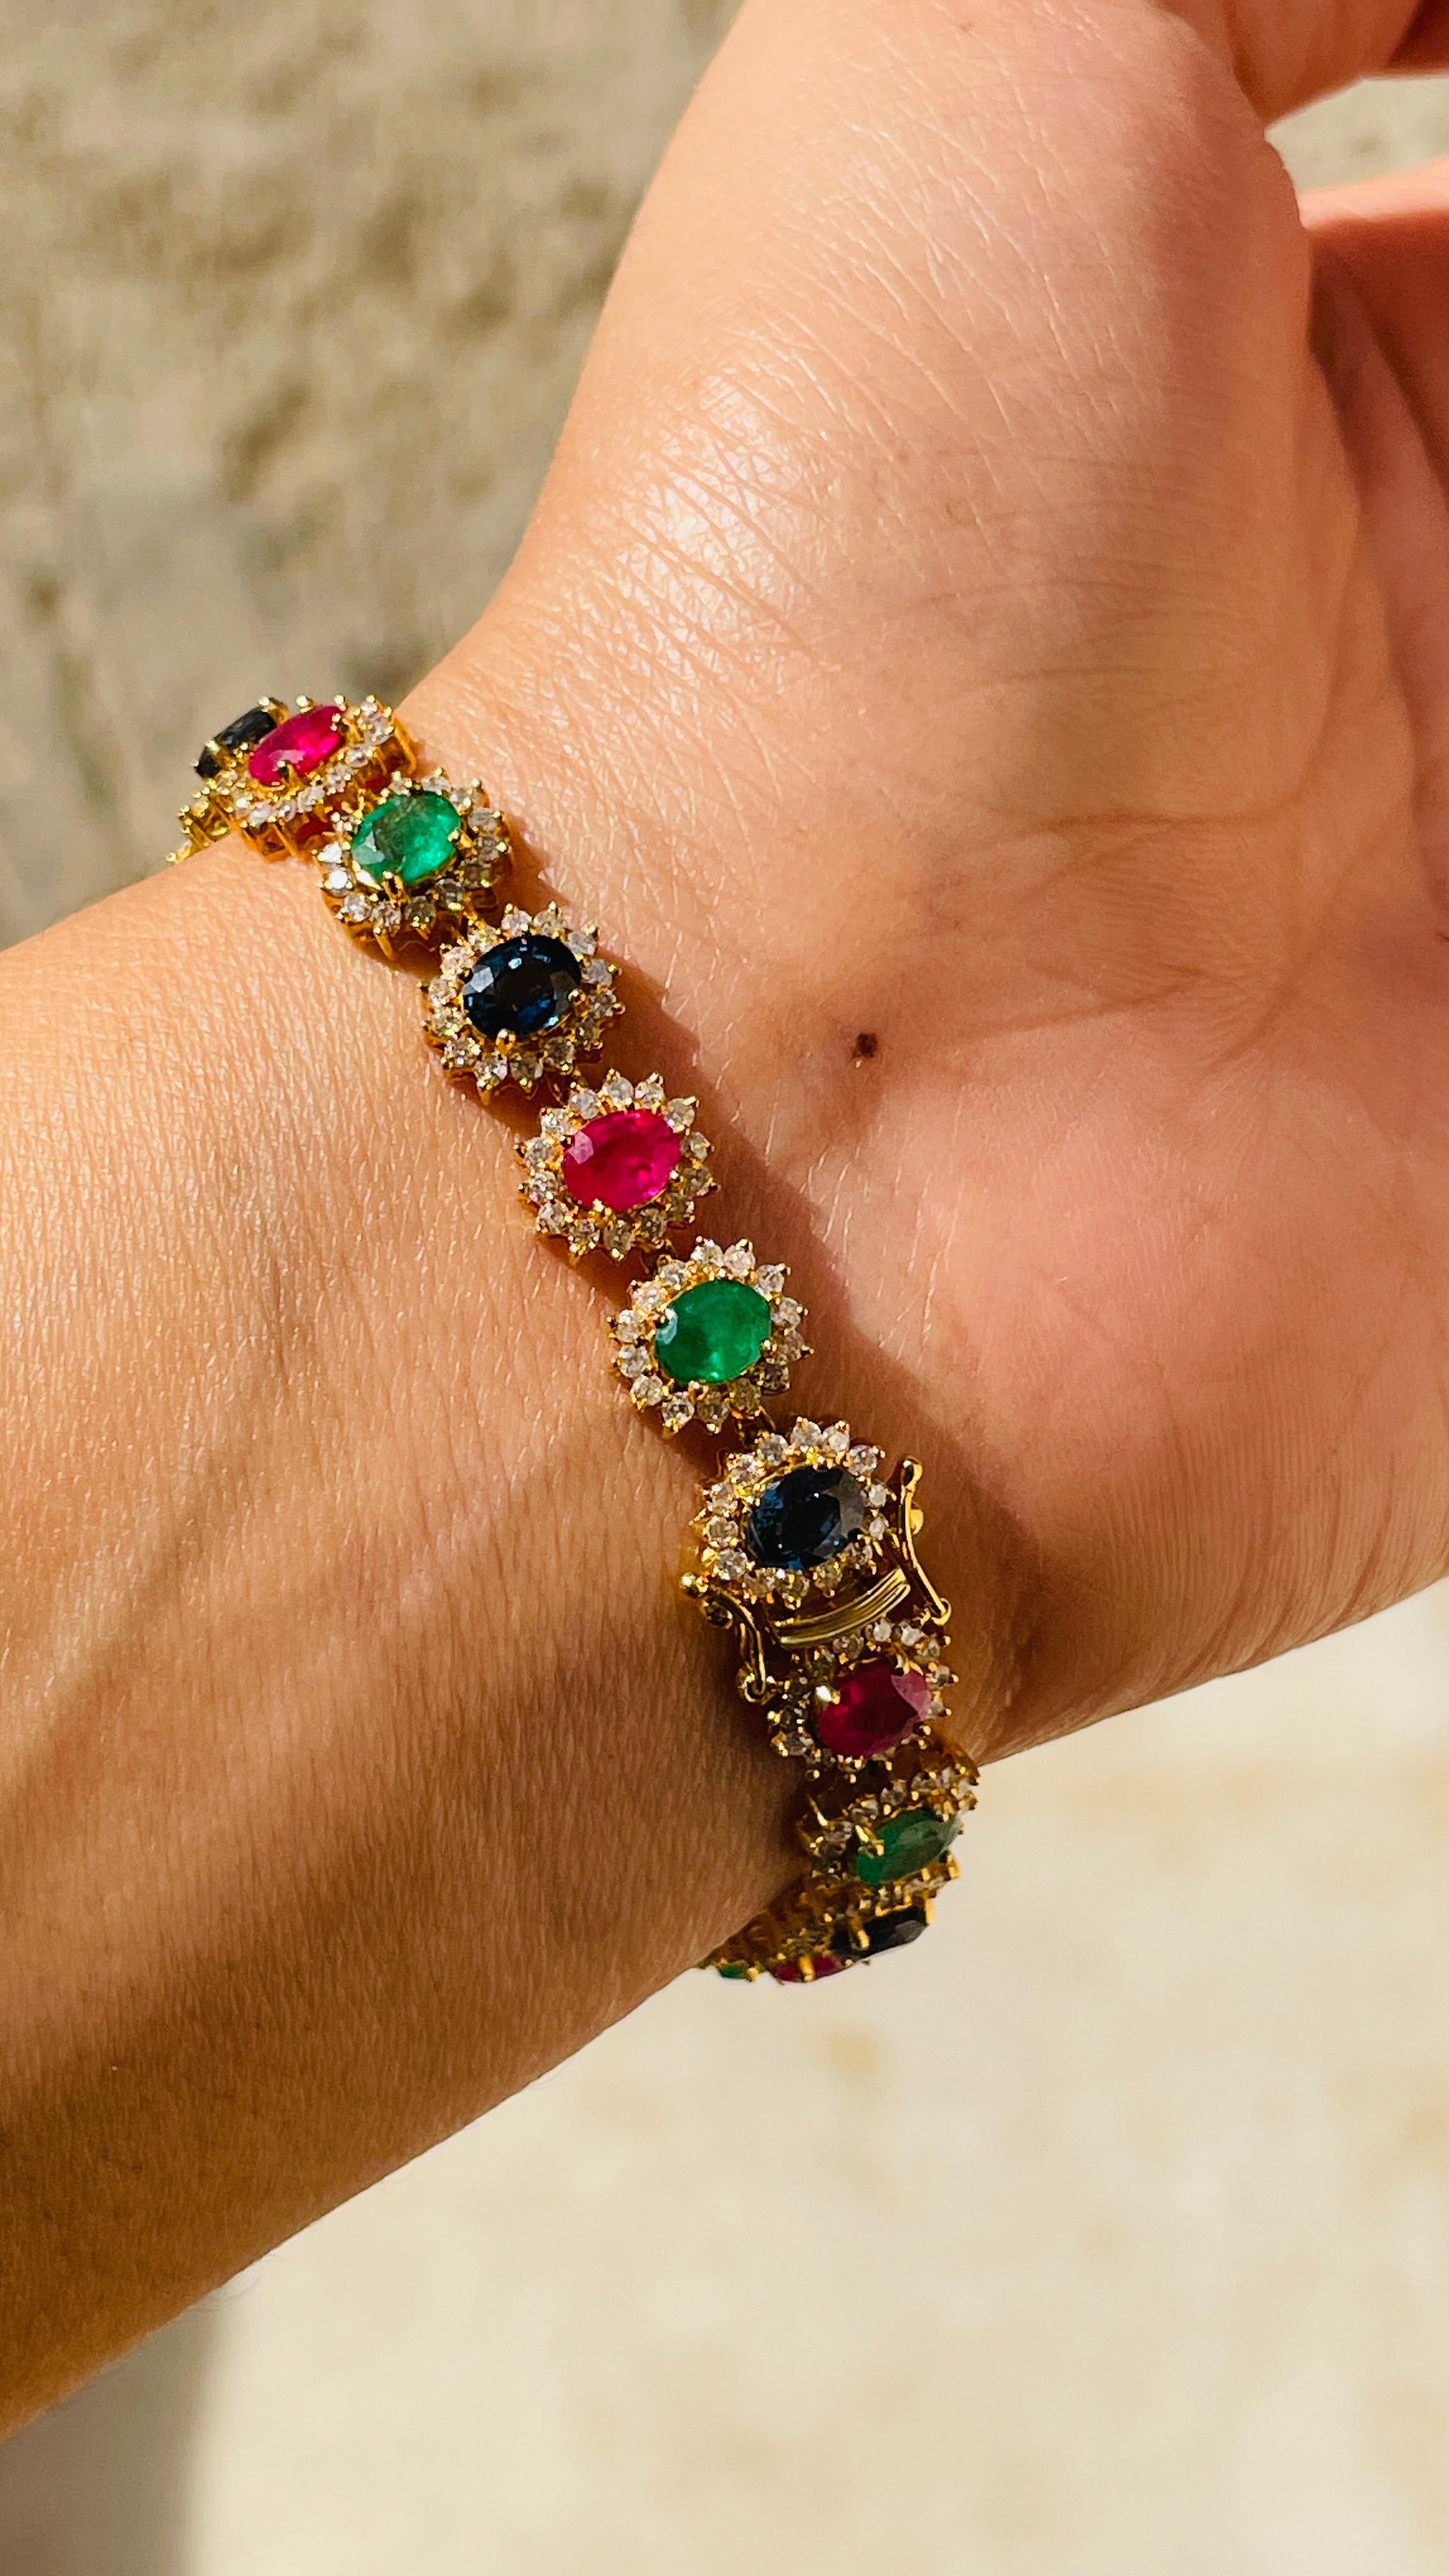 Emerald, Ruby, Blue Sapphire and Diamond bracelet in 18K Gold. It has a perfect oval cut gemstone to make you stand out on any occasion or an event.
A tennis bracelet is an essential piece of jewelry when it comes to your wedding day. The sleek and